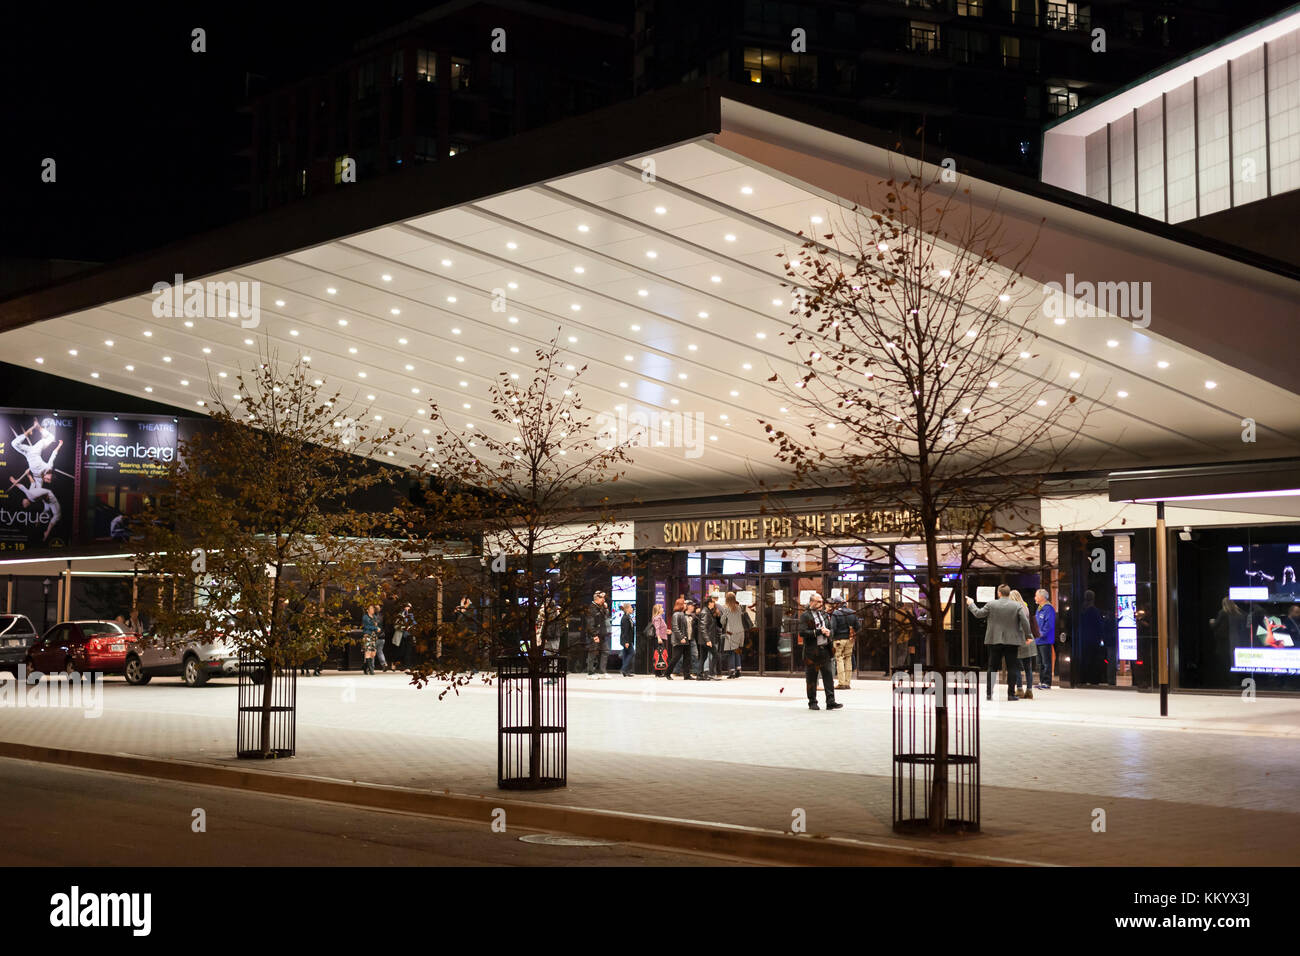 Toronto, Canada - Oct 21, 2017: Sony centre for the performing arts in the city of Toronto, Canada Stock Photo